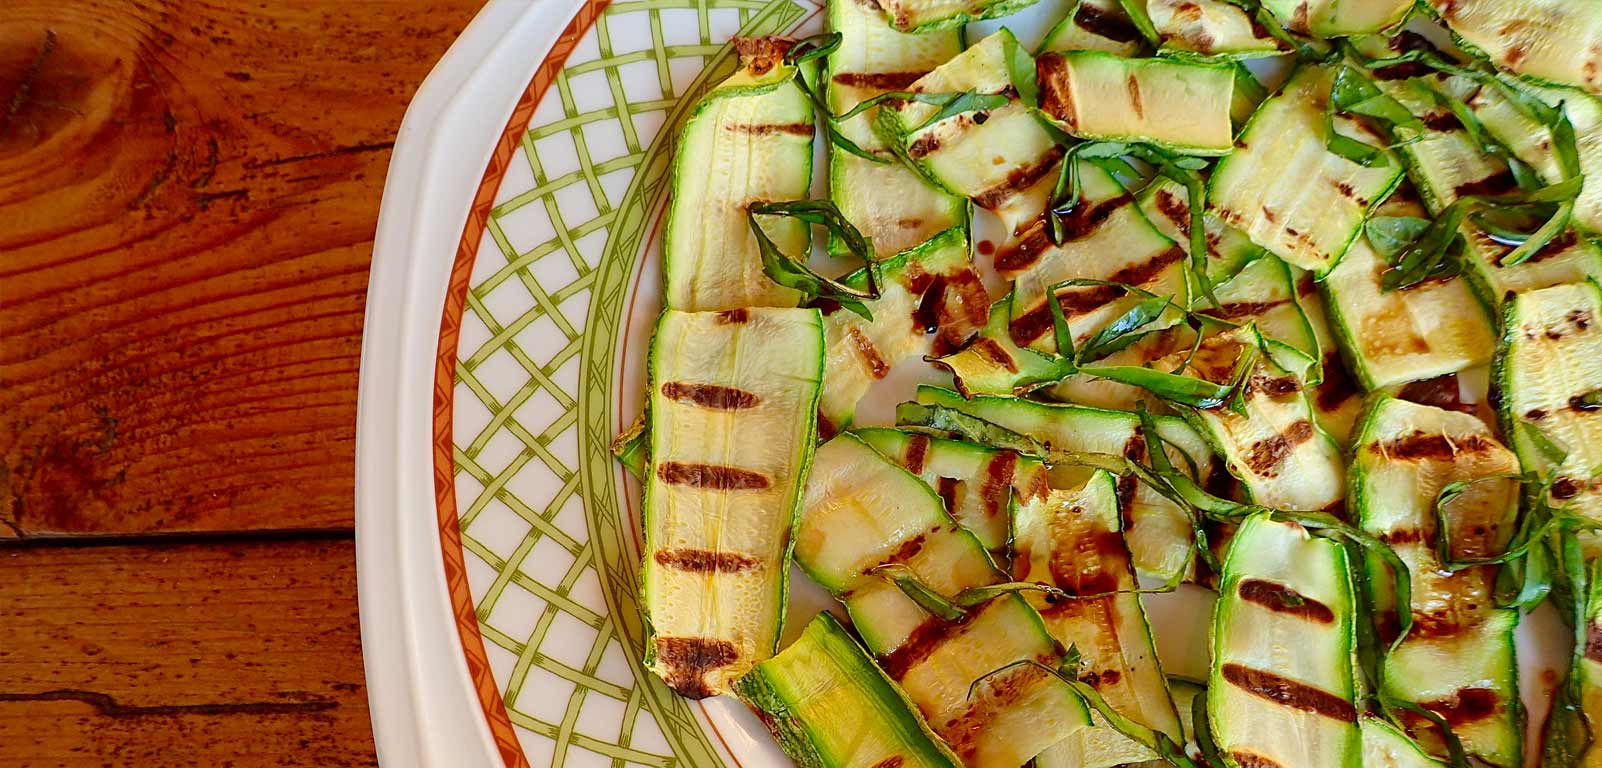 GRILLED ZUCCHINI SALAD WITH FRESH HERBS